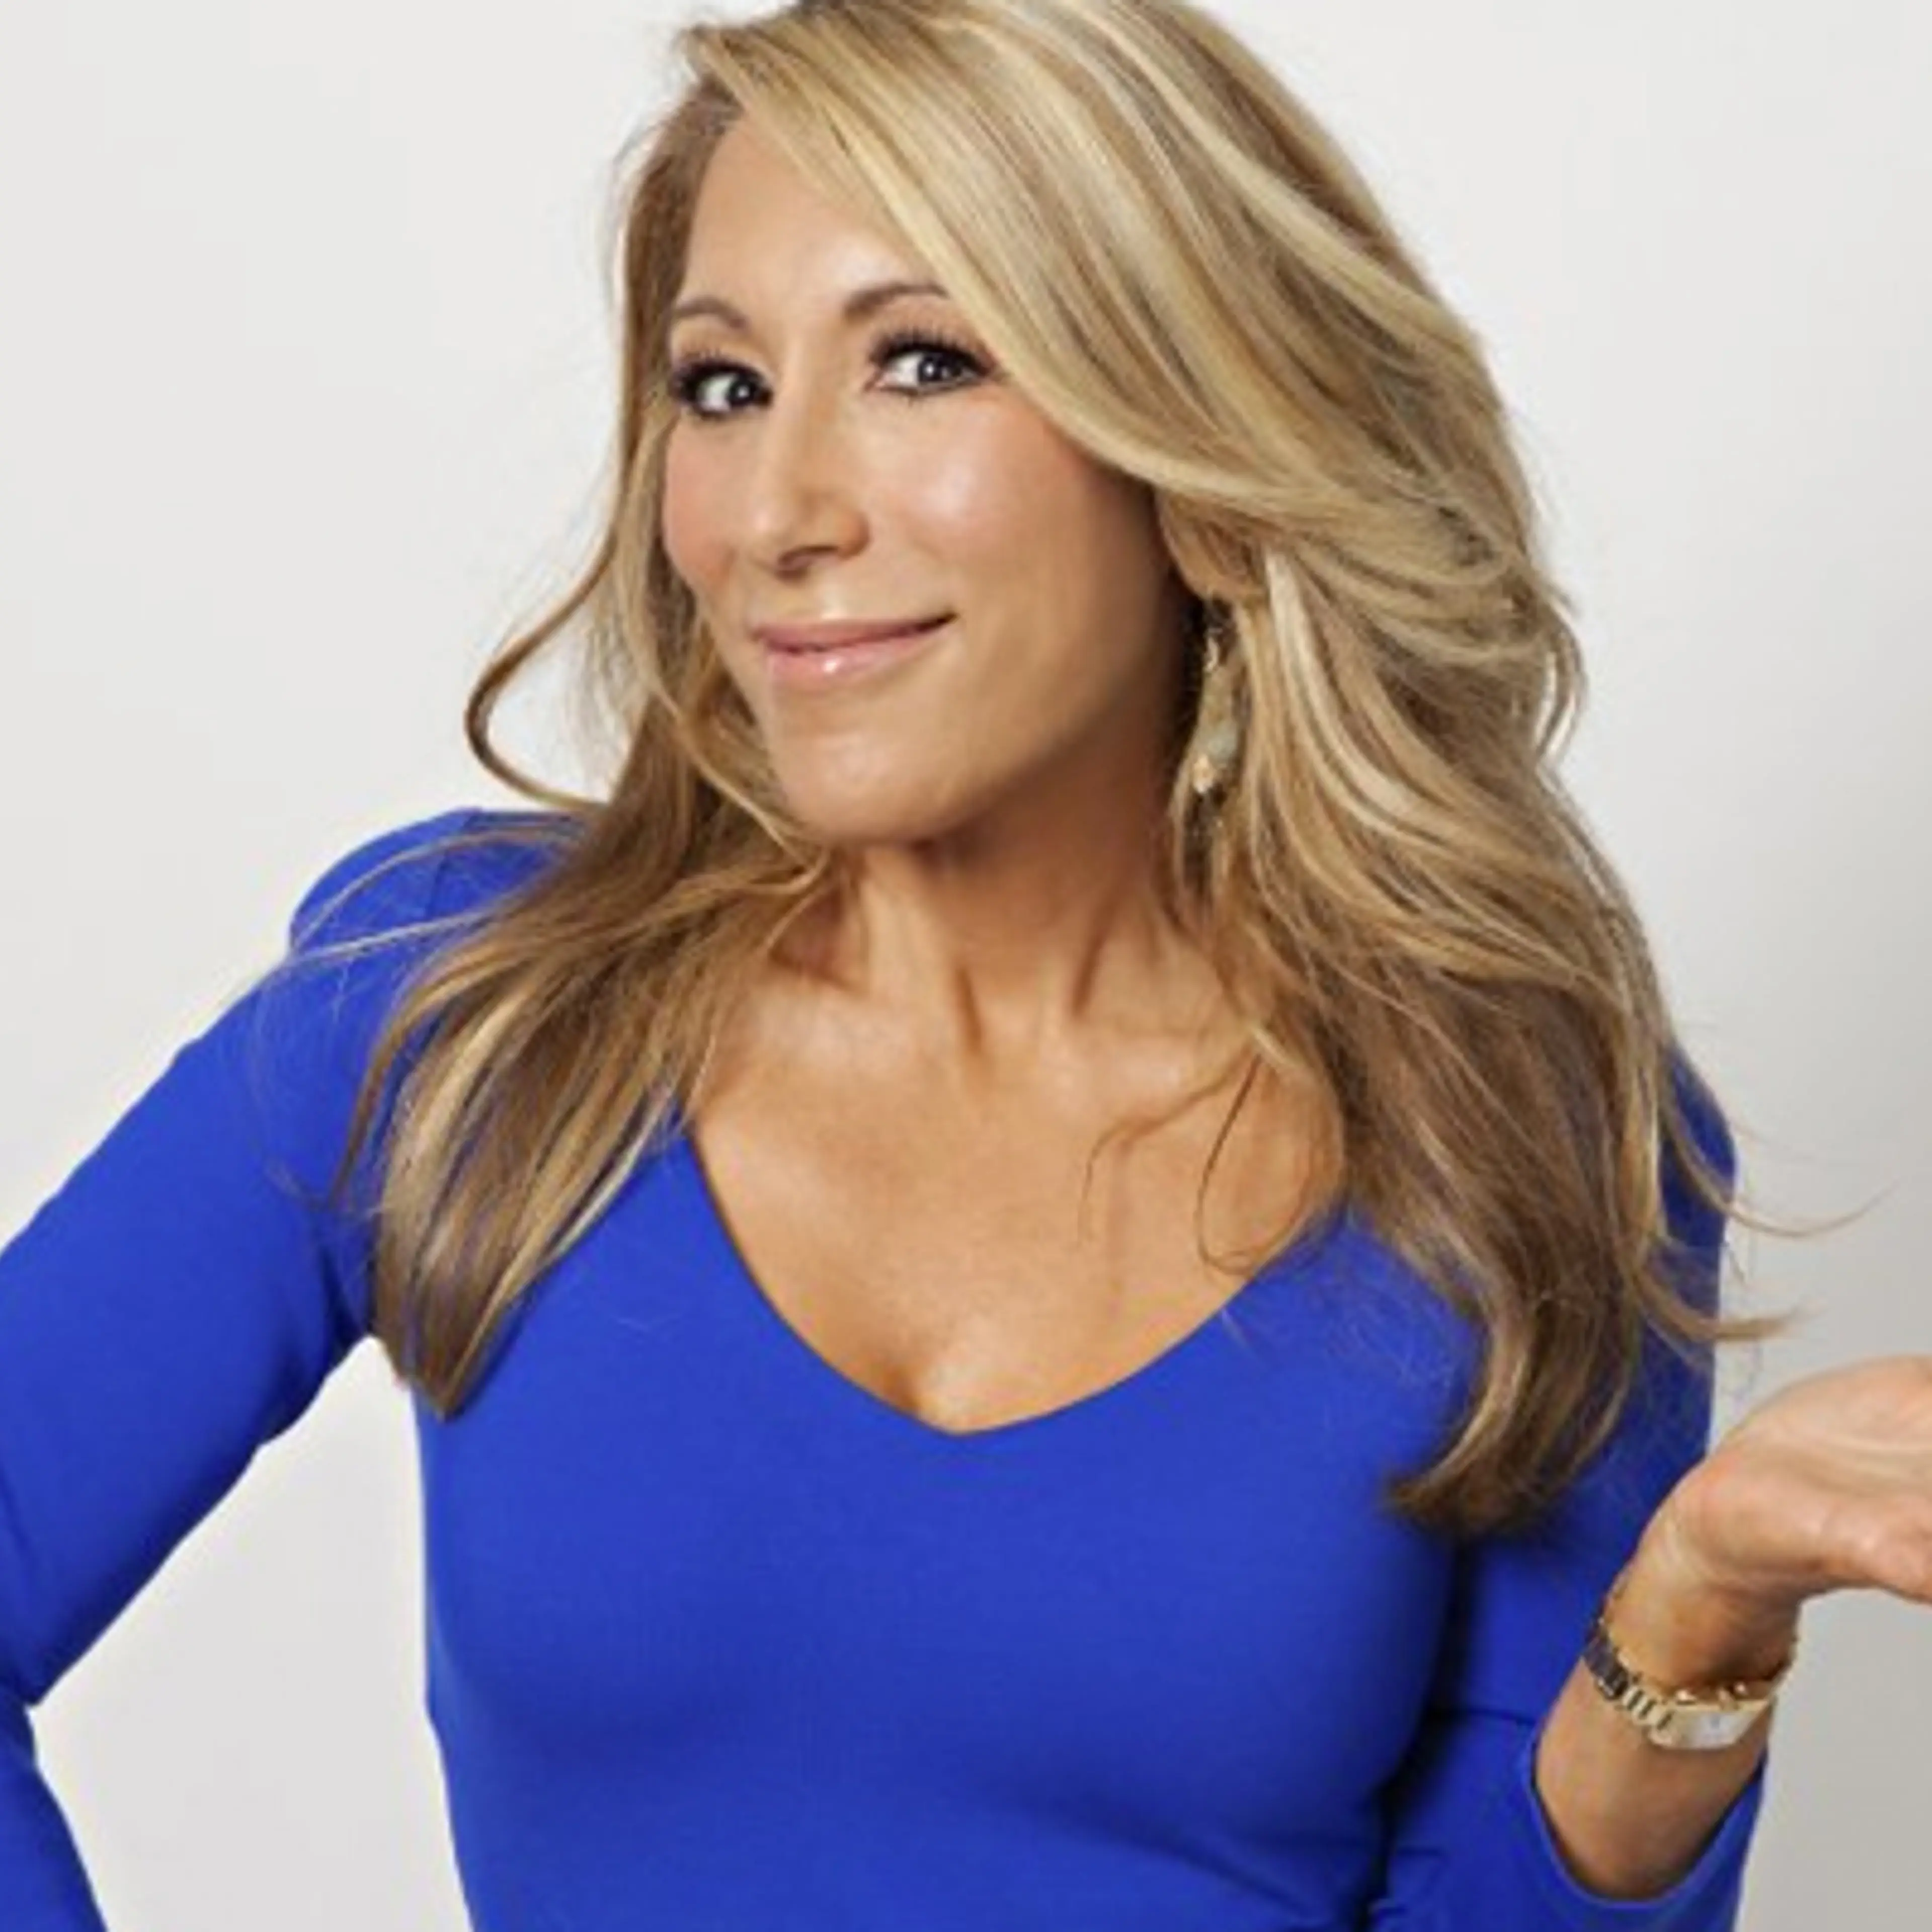 15 quotes from Lori Greiner that’ll wake the entrepreneur in you